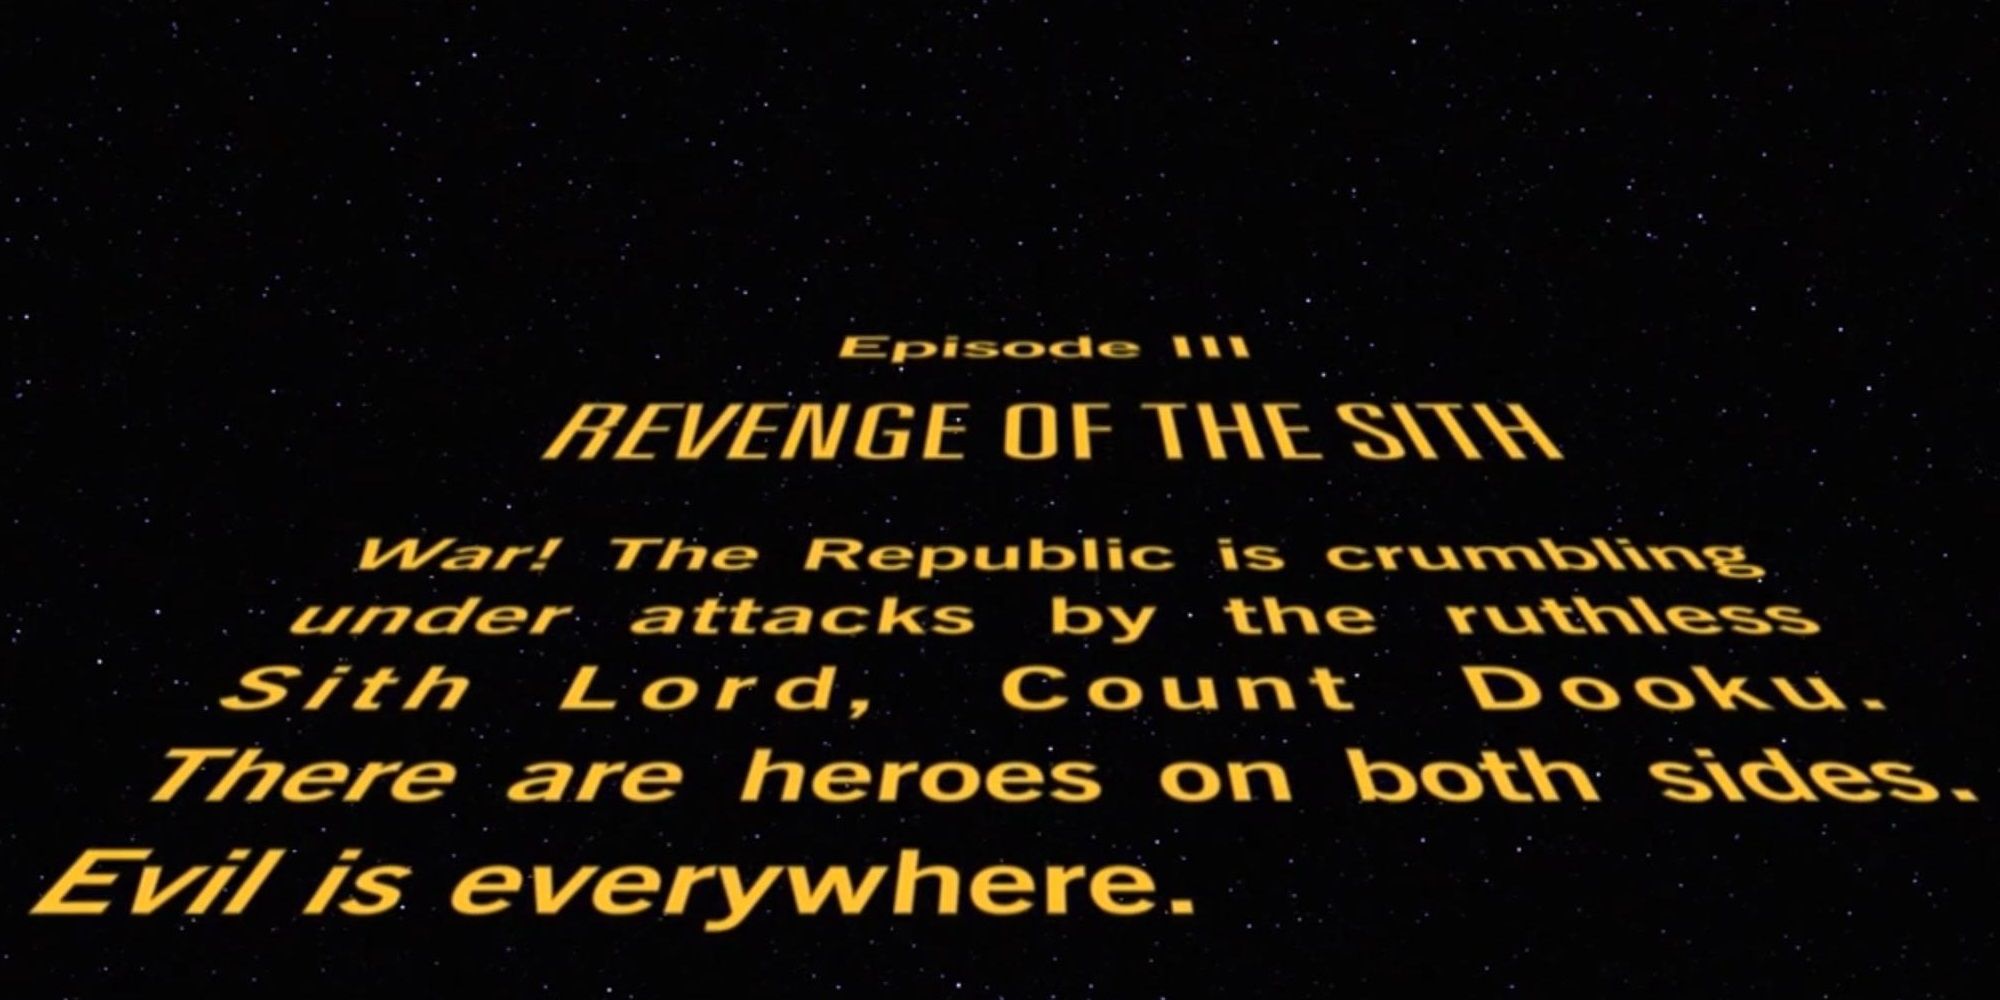 The opening text crawl of Star Wars Episode III Revenge of the Sith